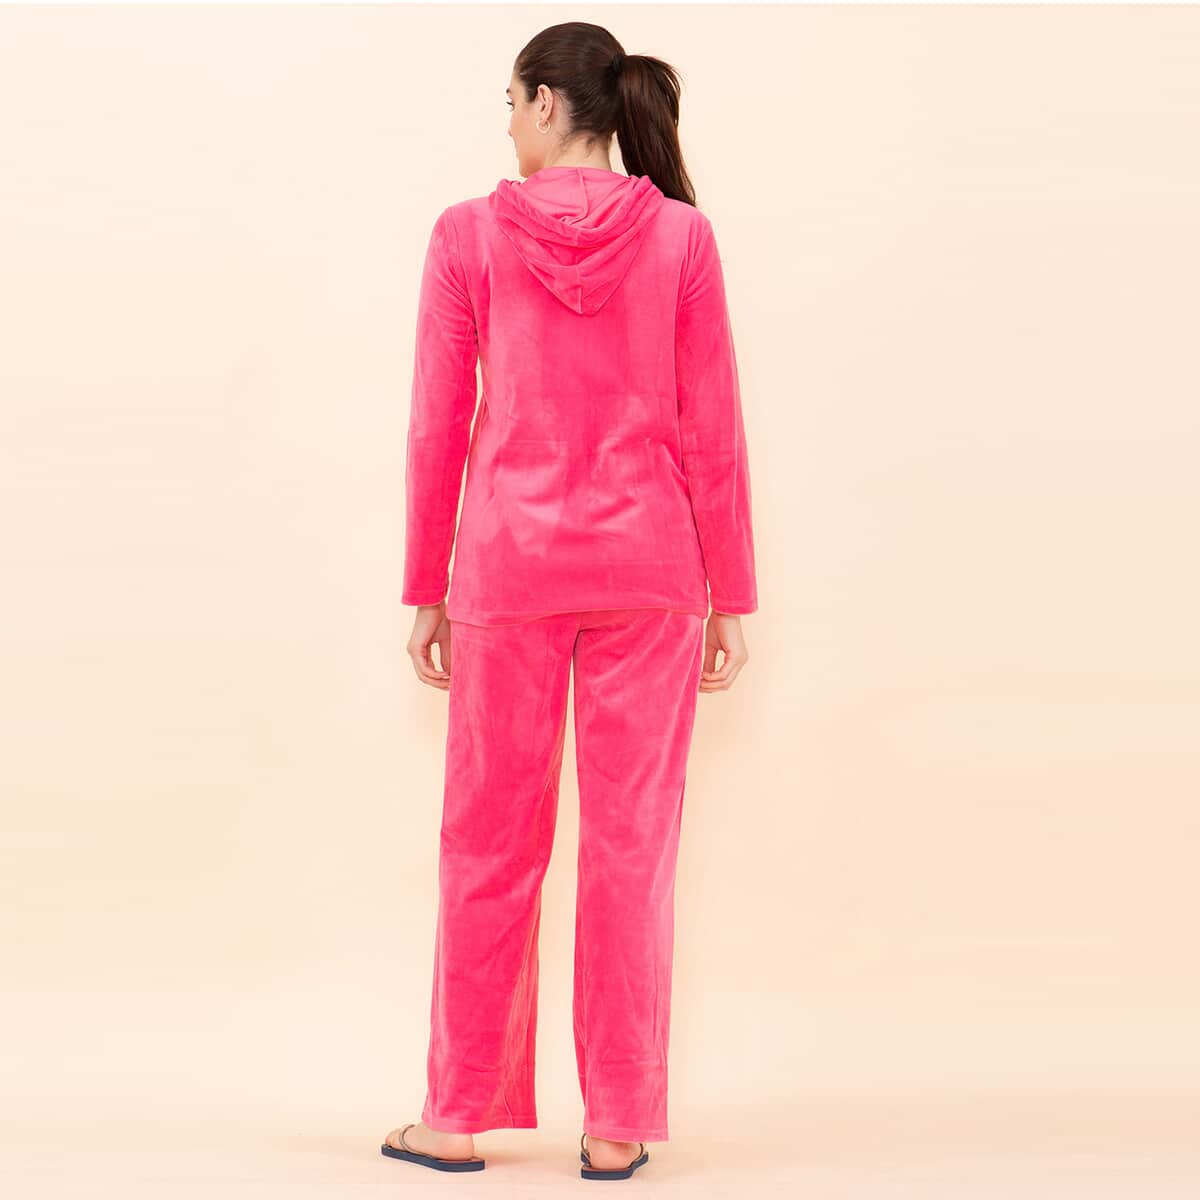 Tamsy LUX Pink Velour Track Suit Set - XL image number 1